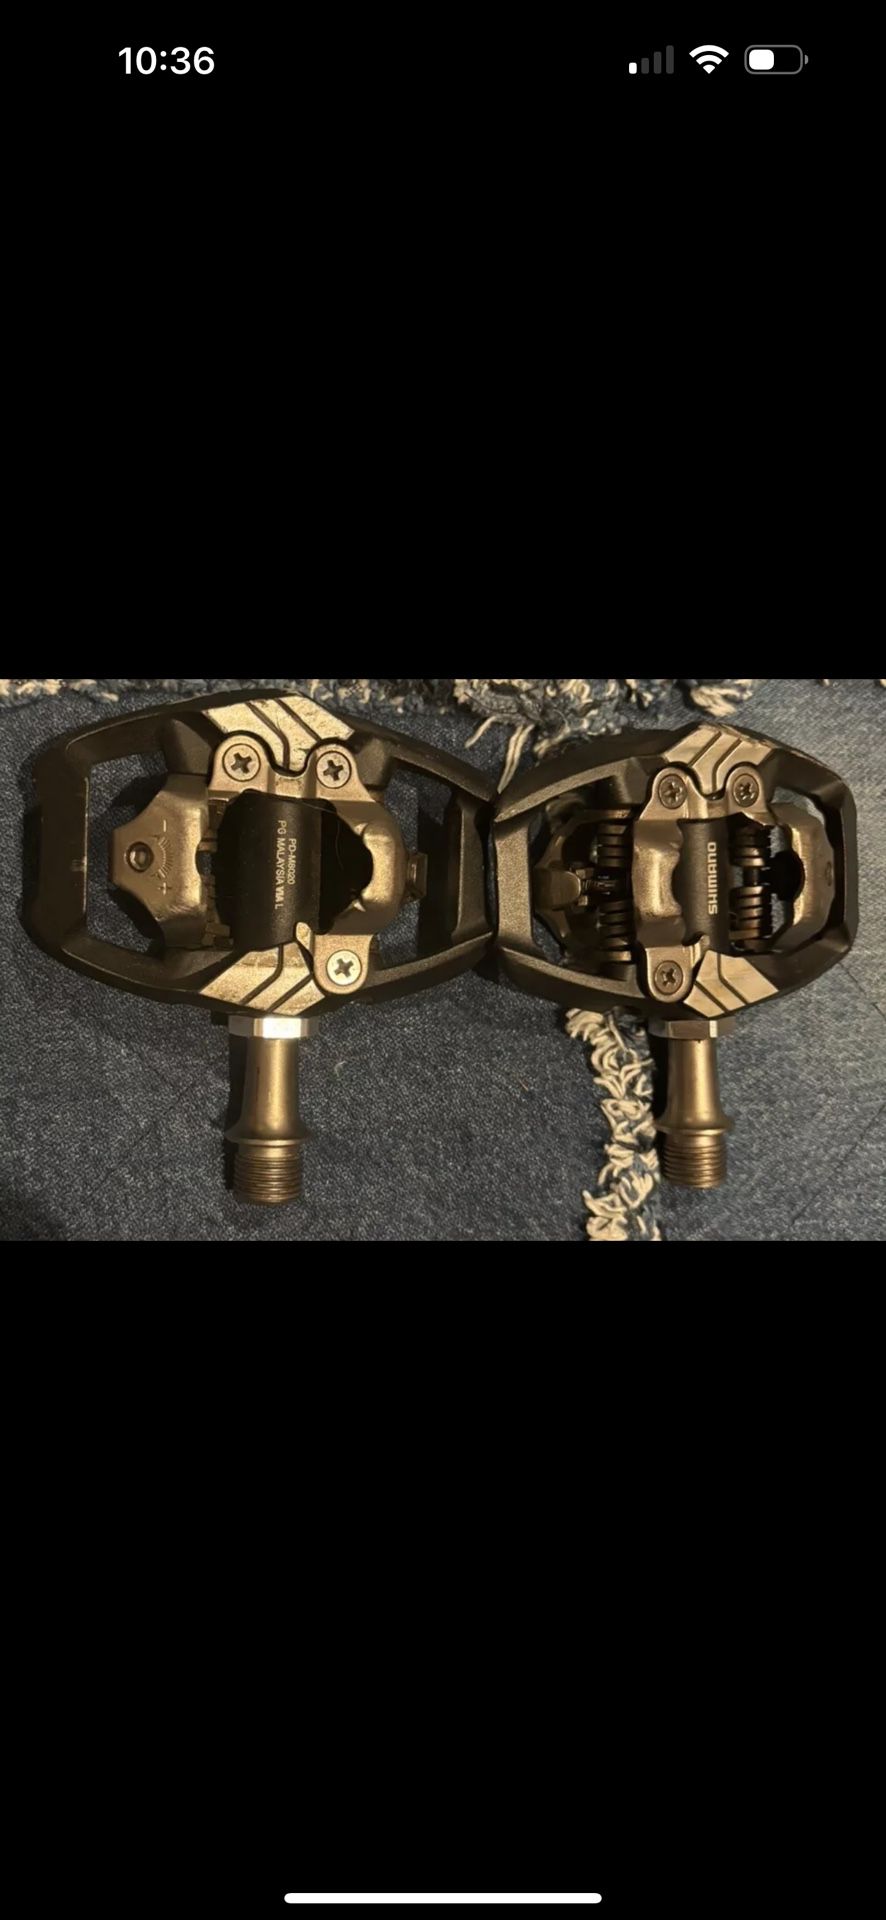 Shimano PD-M8020 Deore XT Pedals